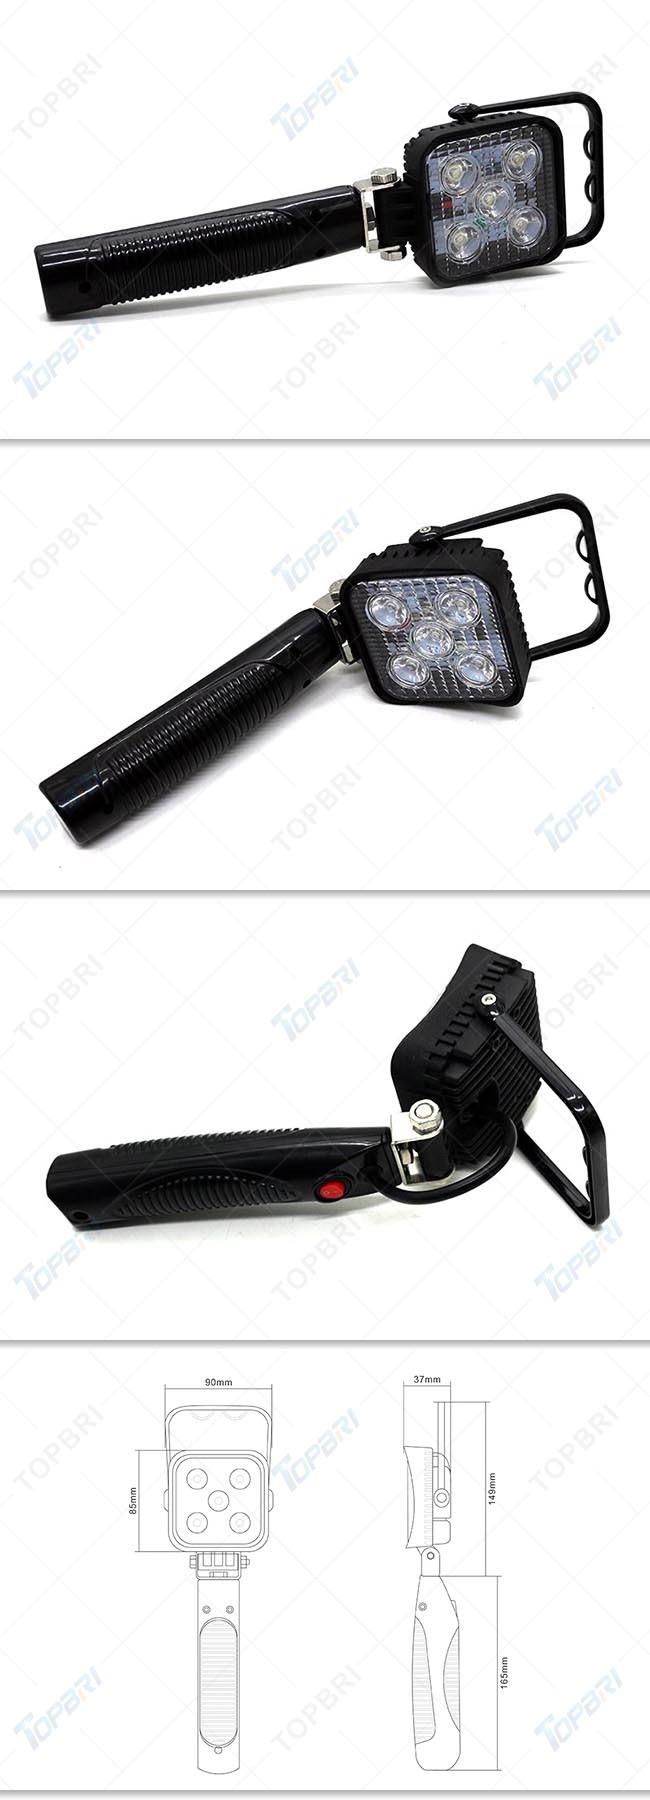 Portable Torch Light 15W Rechargeable Auto LED Work Light